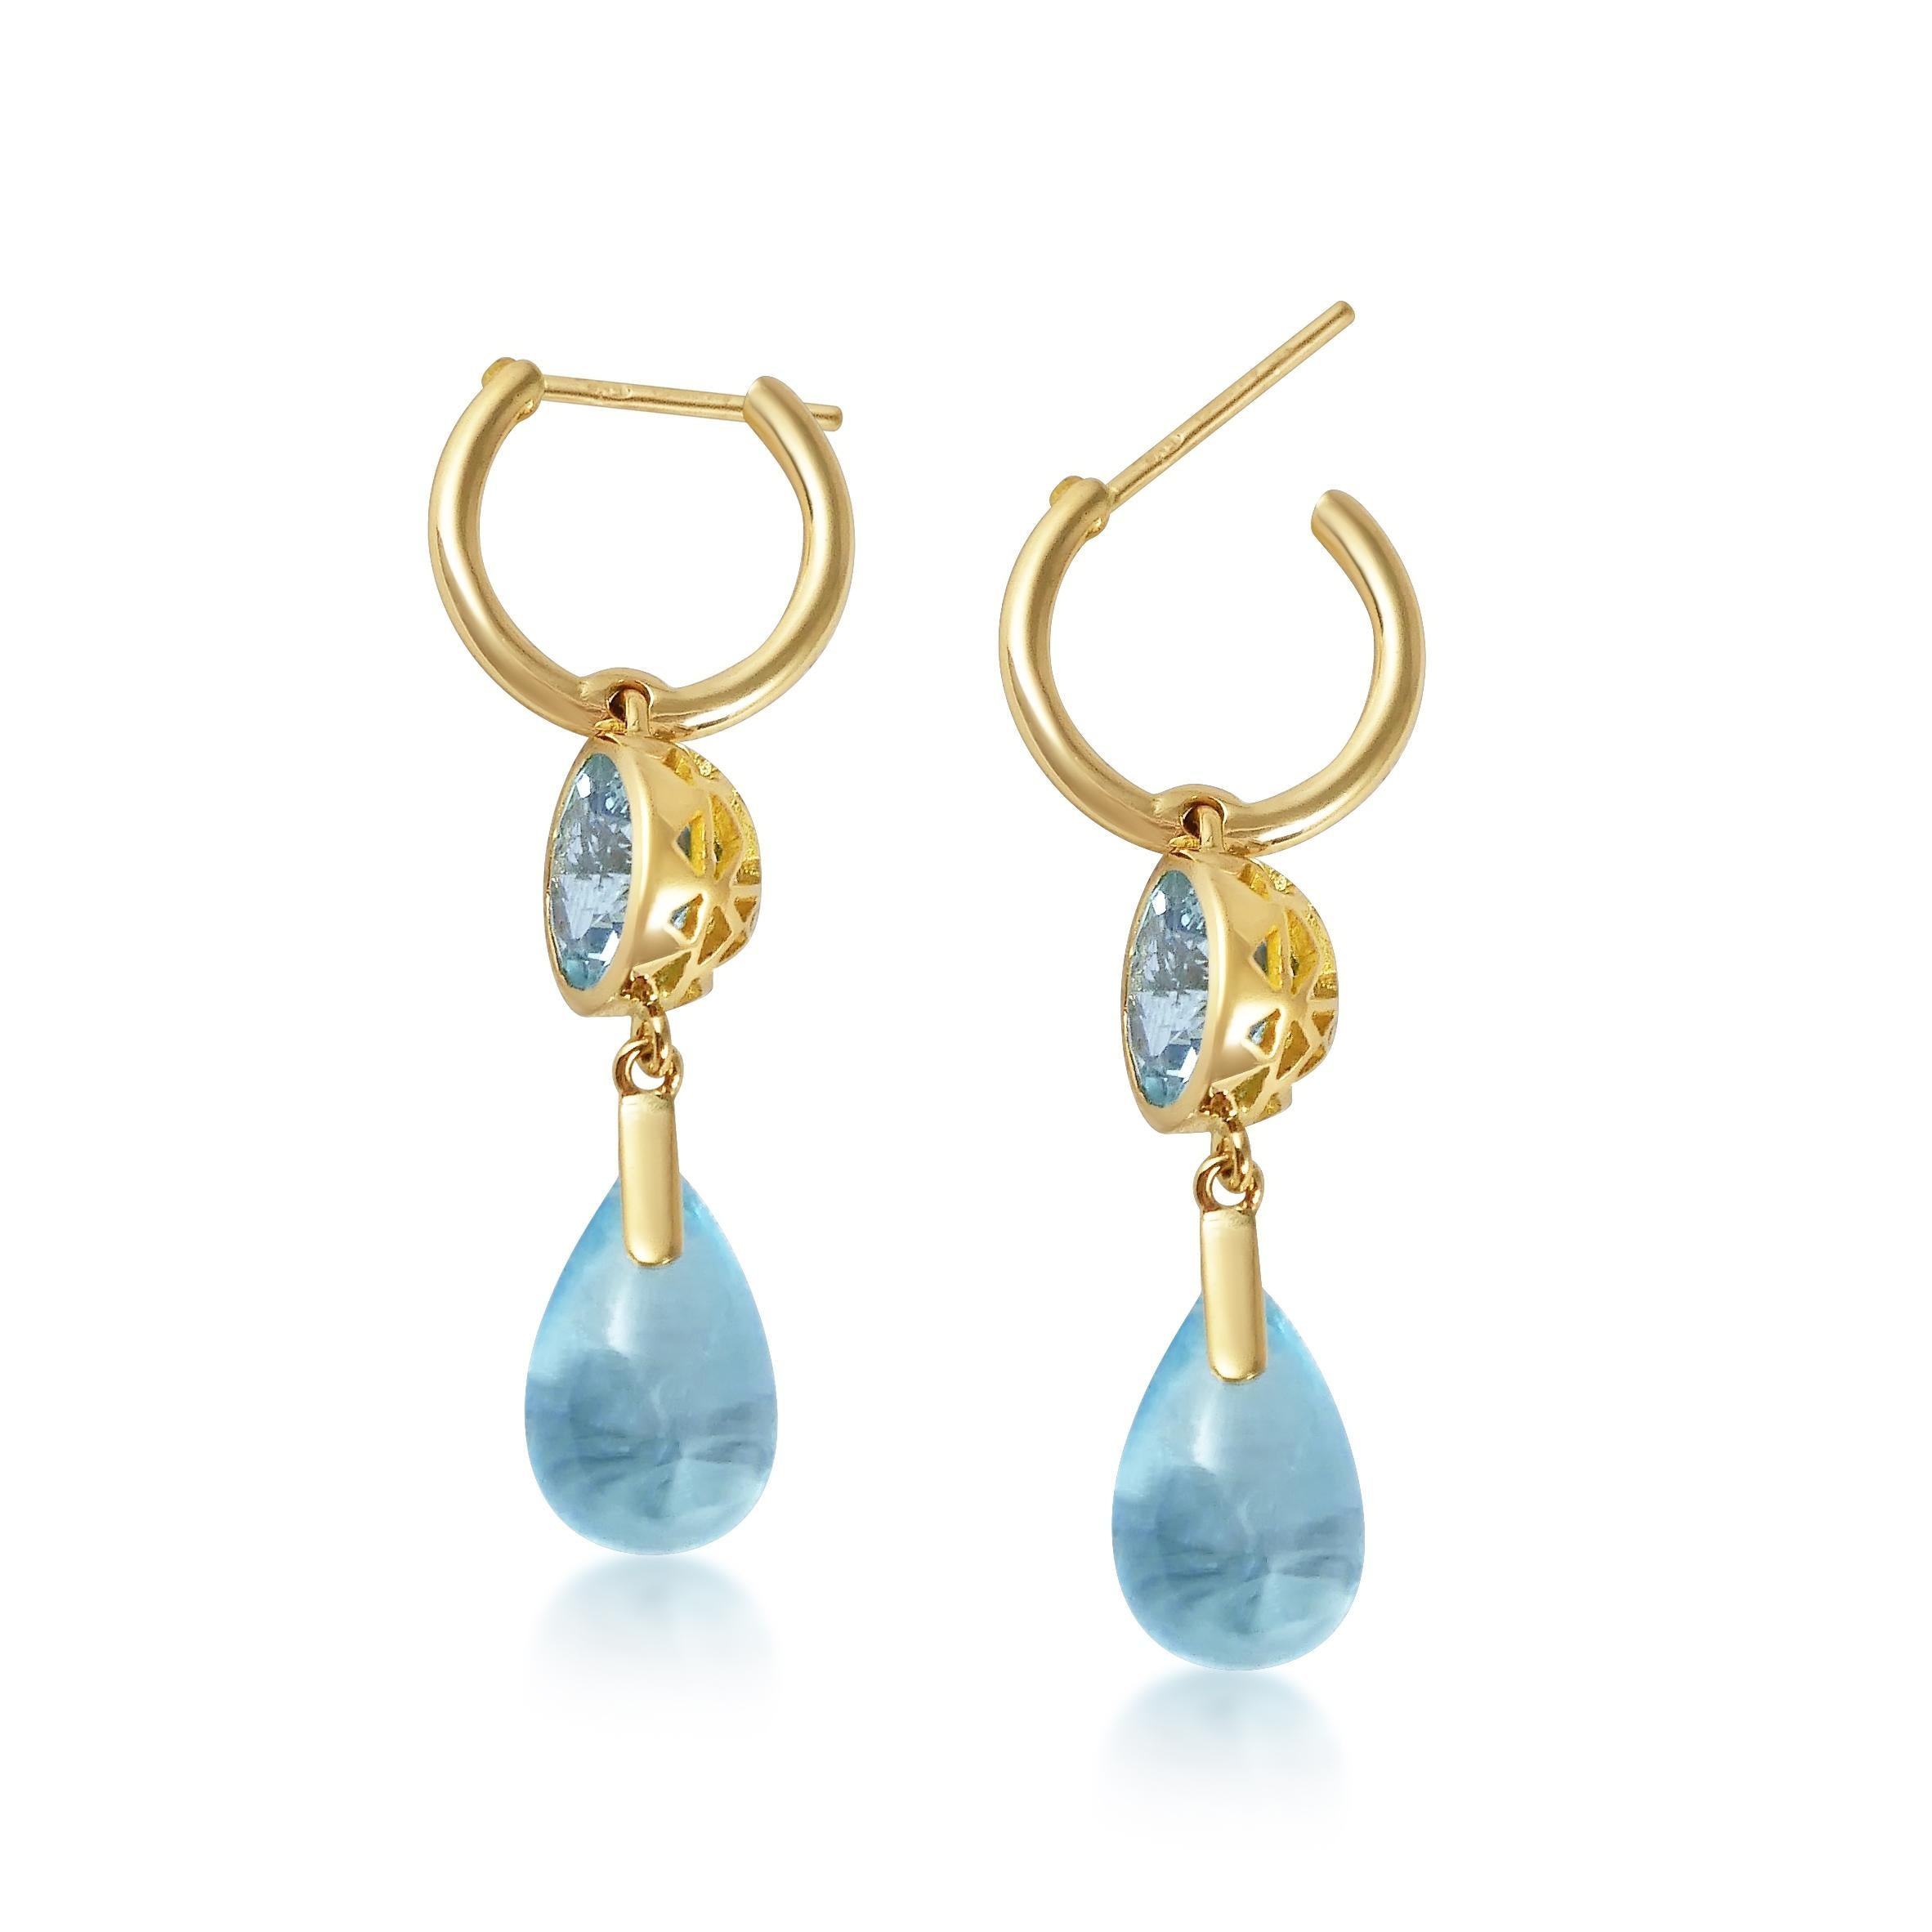 Contemporary Handcrafted 2.70 & 4.40 Carats Aquamarines 18 Karat Yellow Gold Drop Earrings For Sale